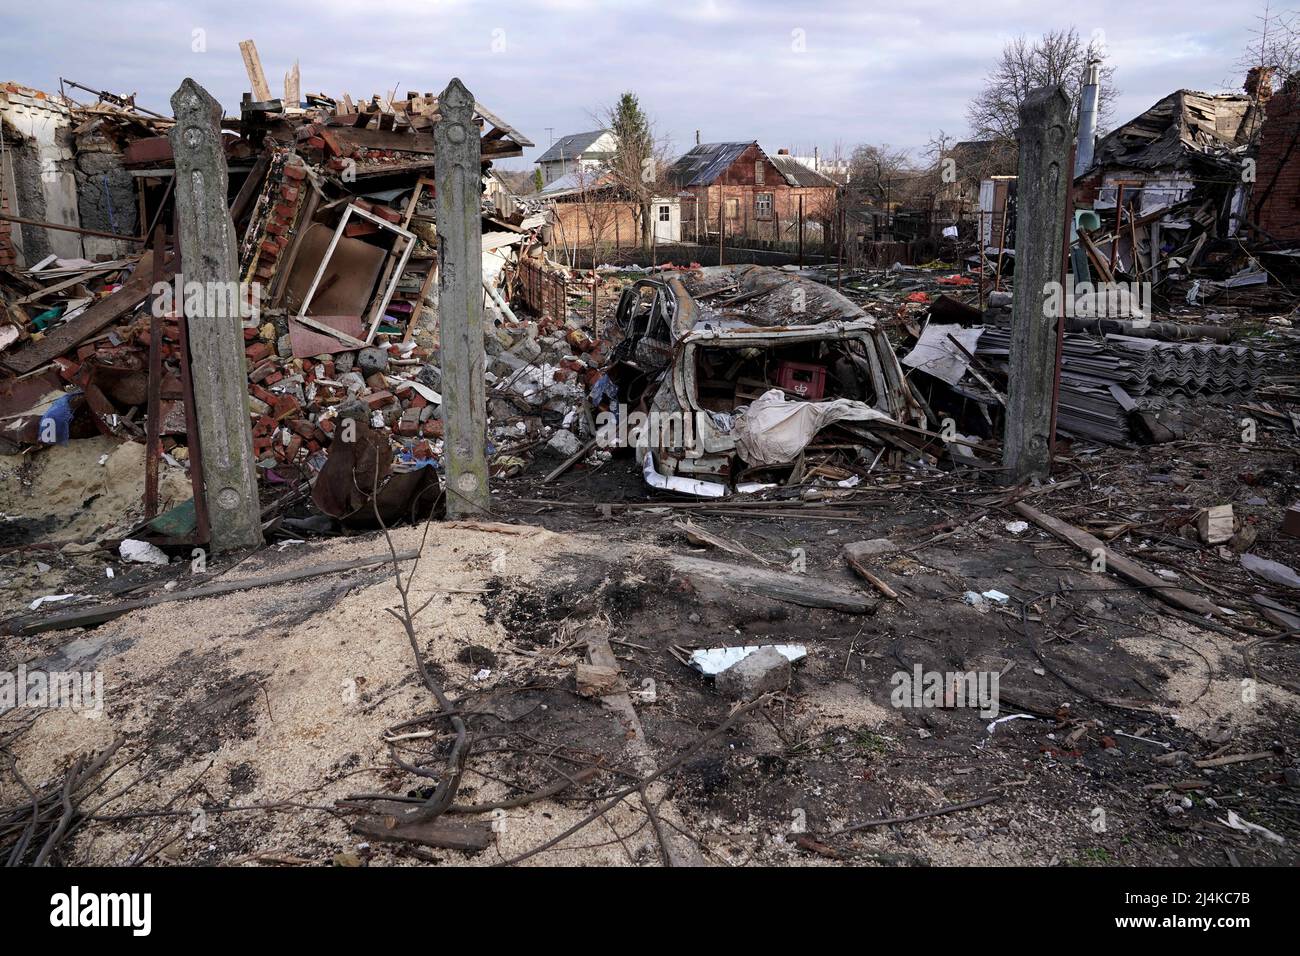 SUMY, UKRAINE - APRIL 14, 2022 - The consequences of Russian shelling are pictured in Sumy, northeastern Ukraine. Photo by Anna Voitenko/Ukrinform/ABACAPRESS.COM Stock Photo